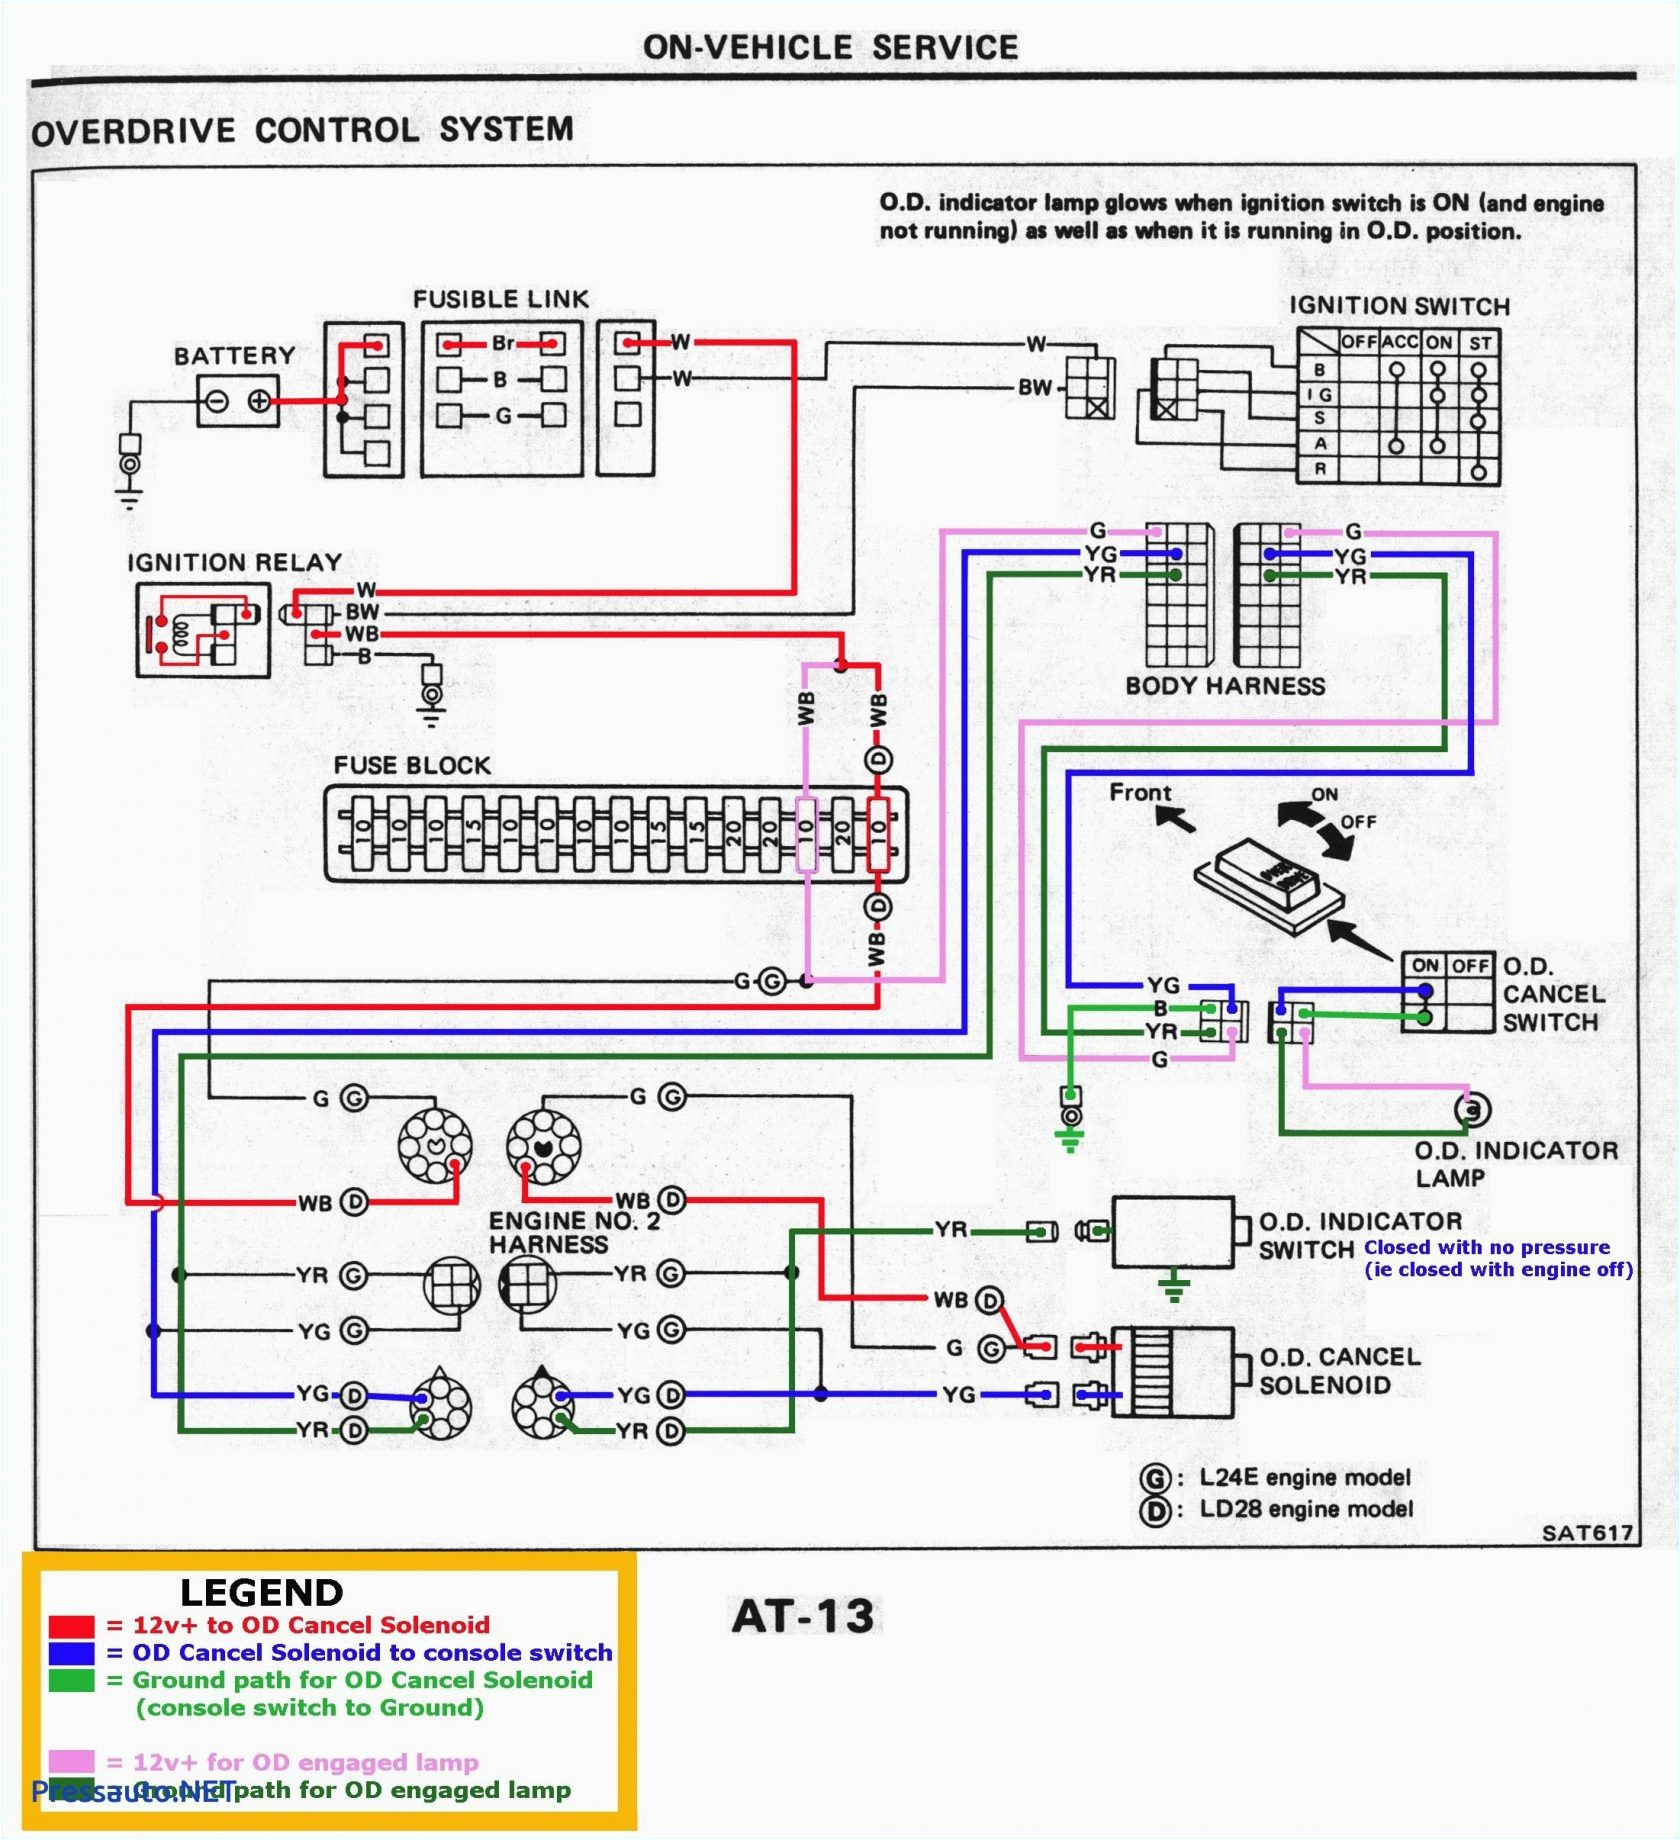 typical ignition switch wiring diagram mini bike wiring diagram view wire ignition switch diagram figure 4 amazon wiring